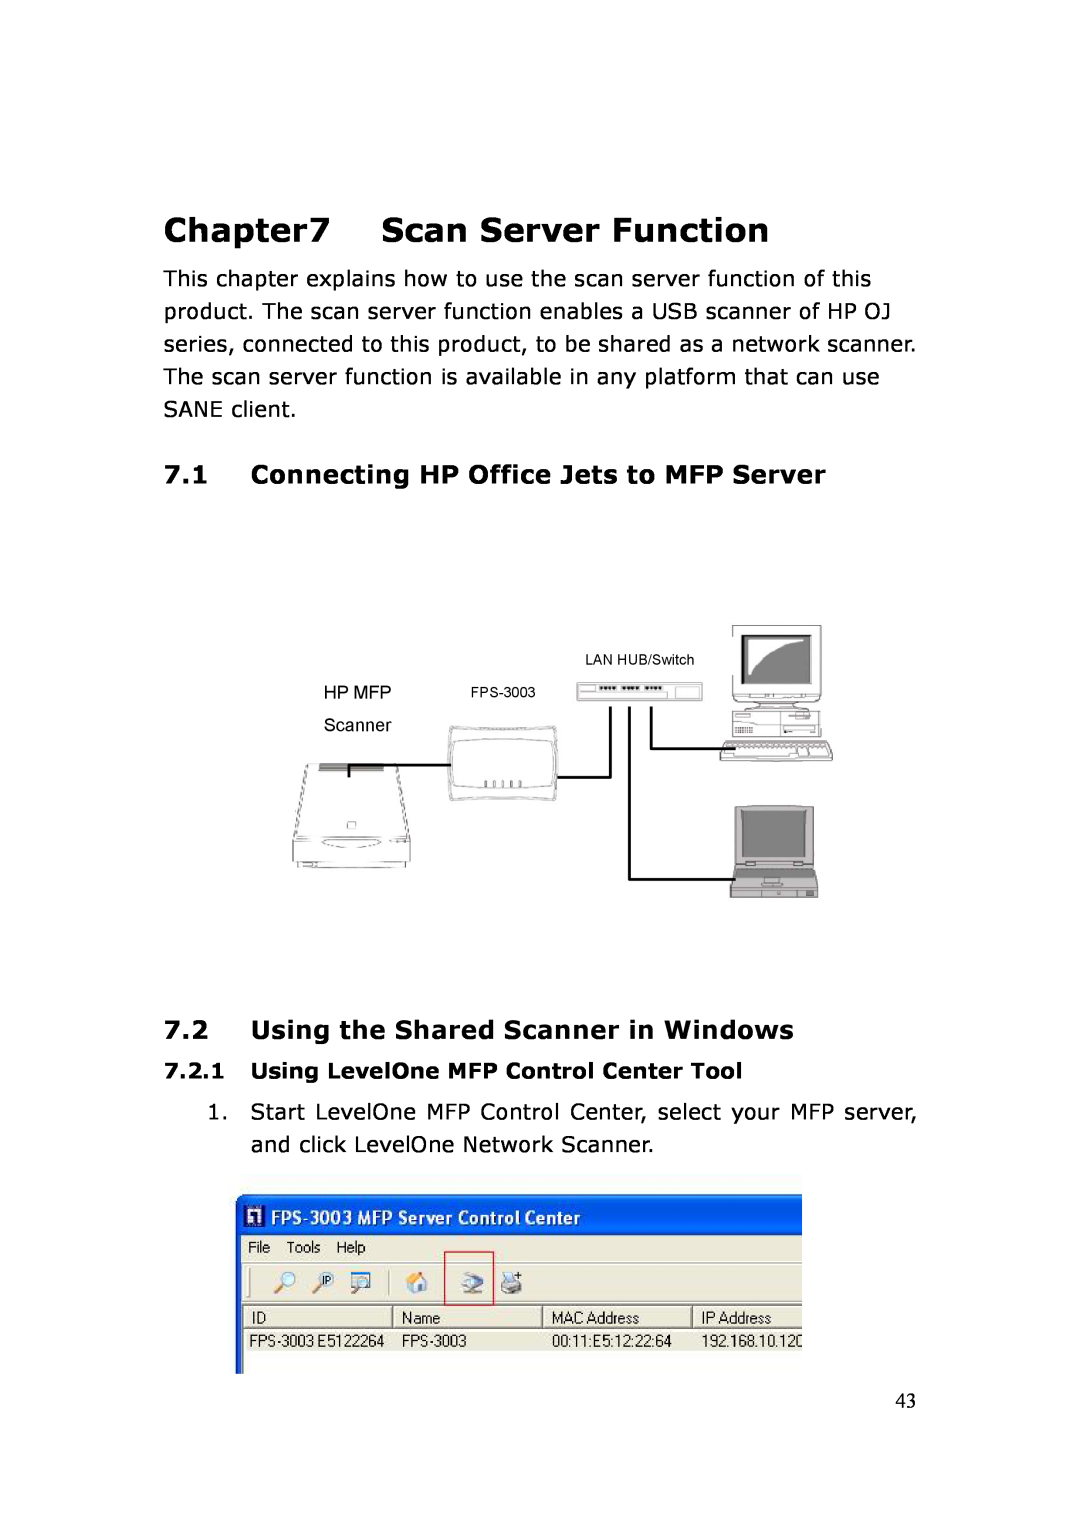 LevelOne FPS-3003 Scan Server Function, Connecting HP Office Jets to MFP Server, Using the Shared Scanner in Windows 